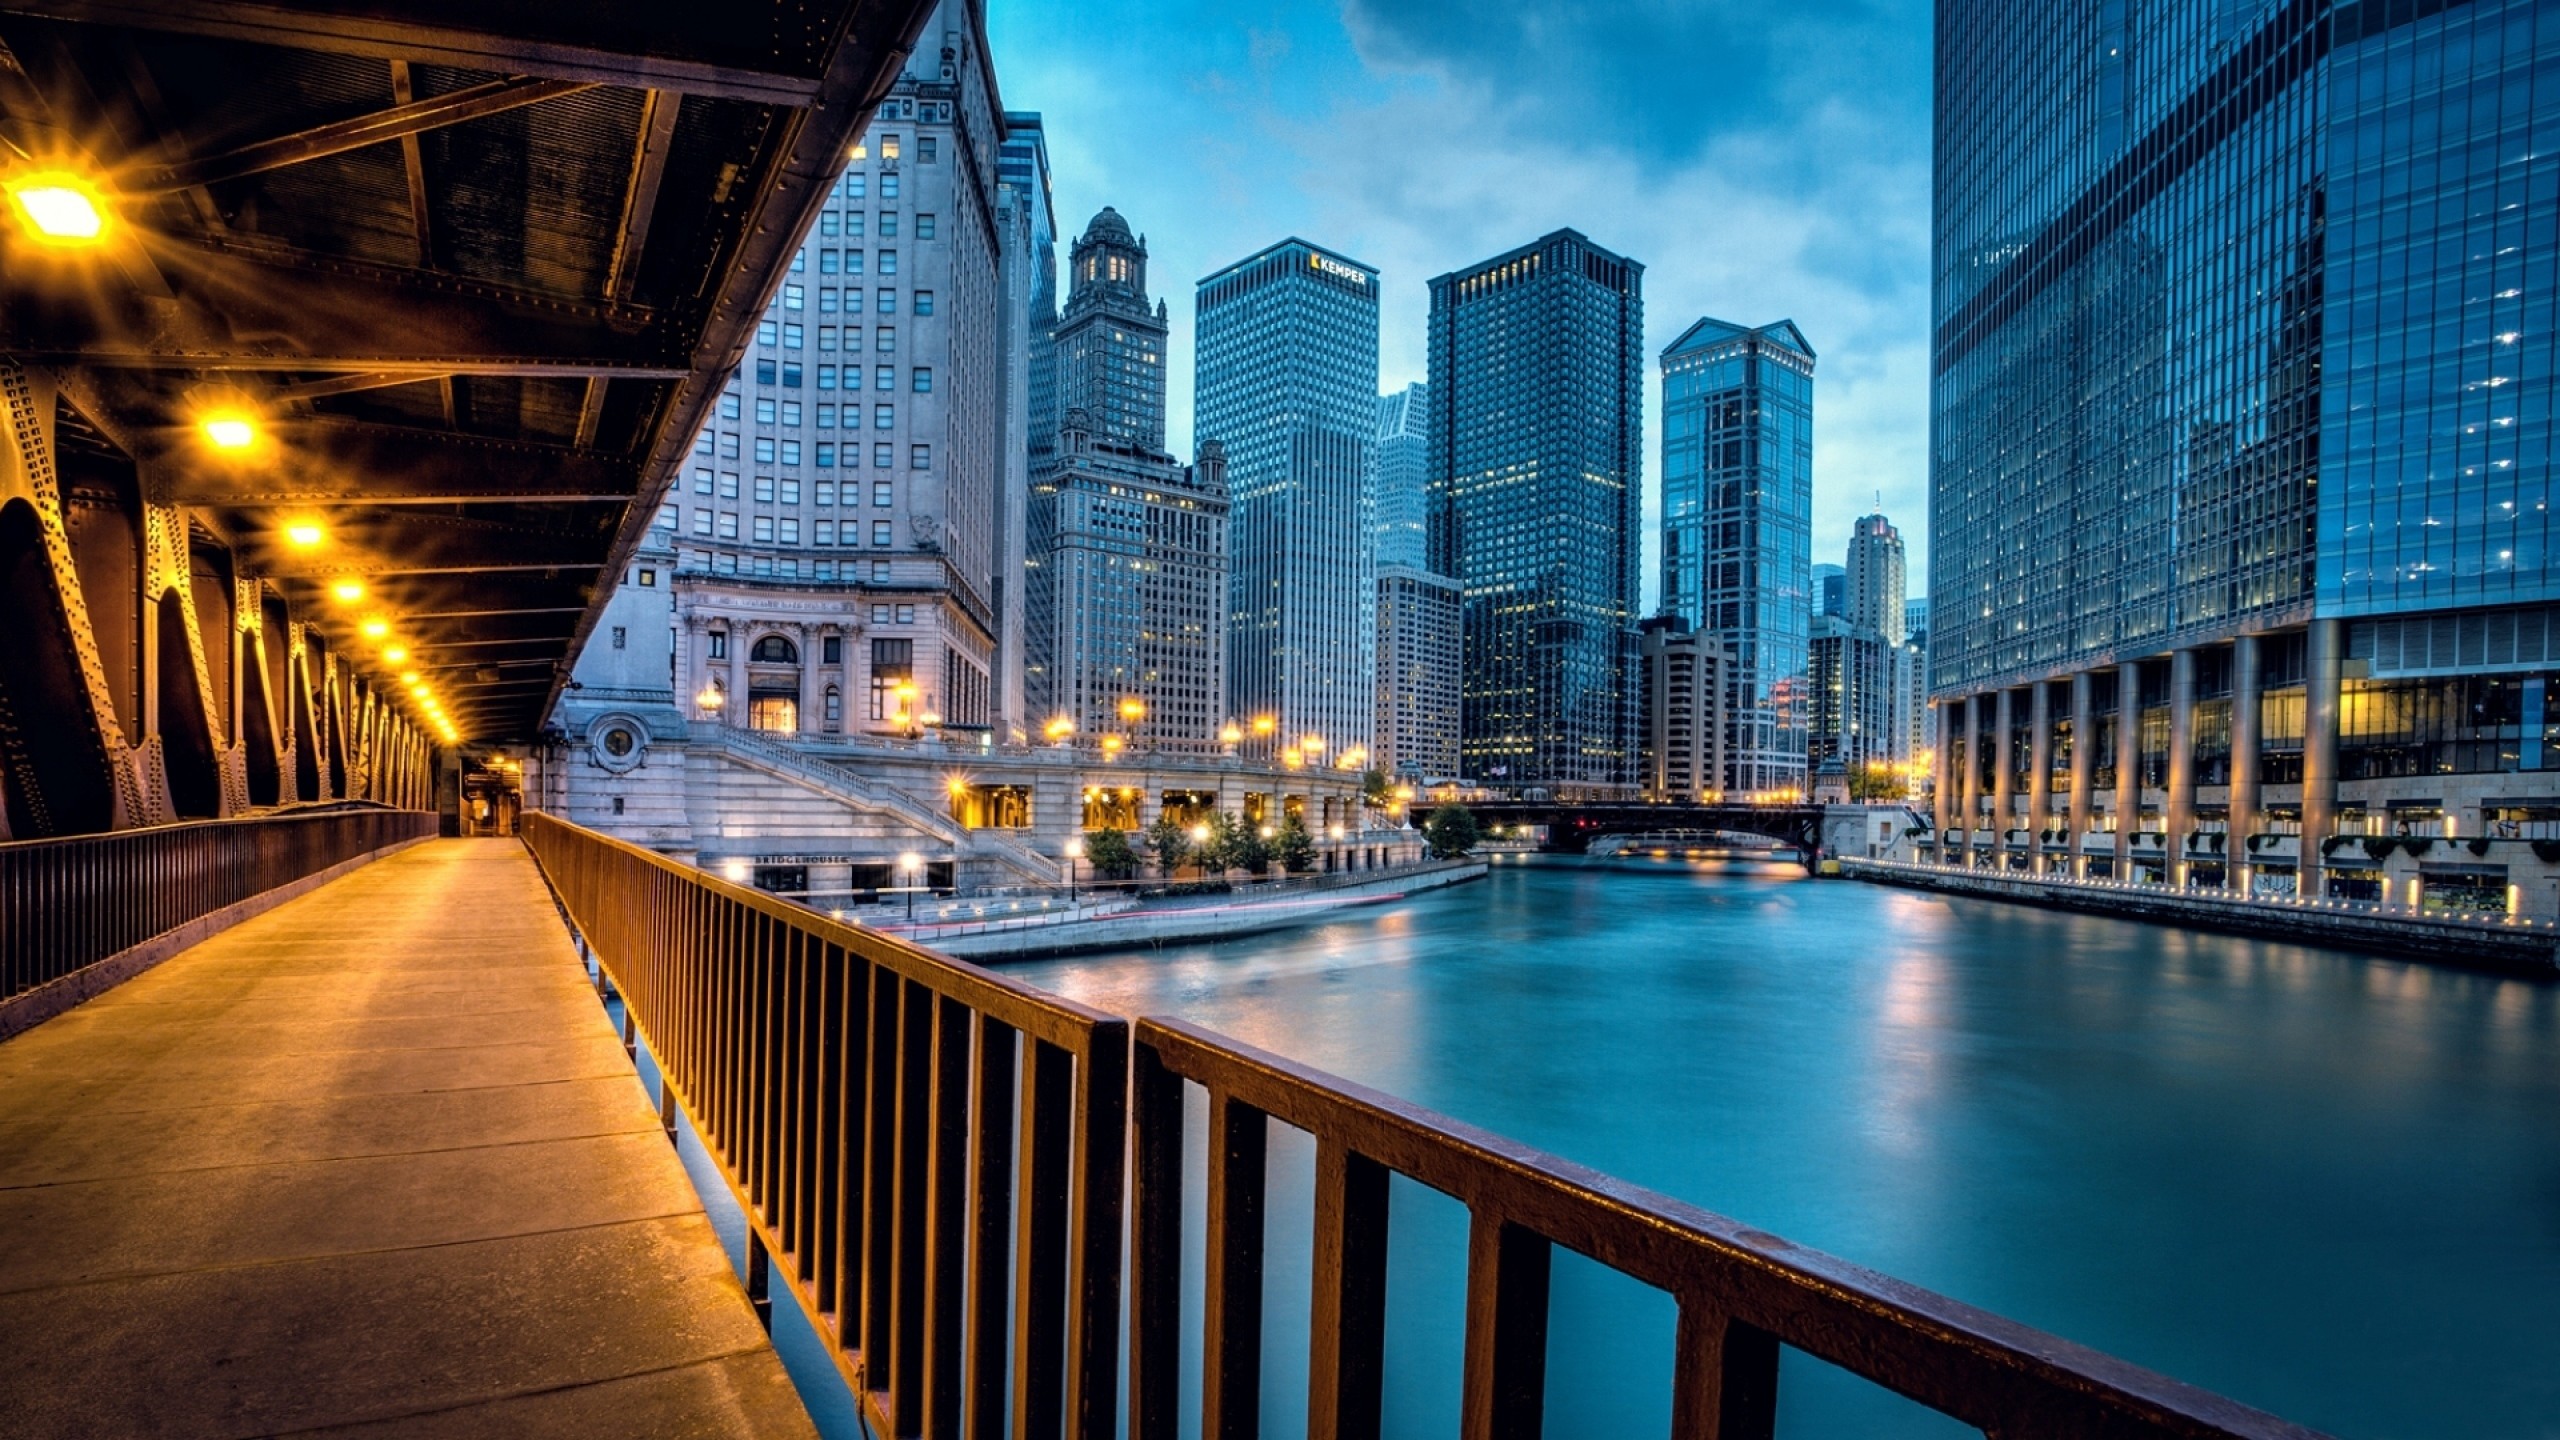 2560x1440 chicago-city-wallpaper-background-hd-18668-19220-hd-wallpapers